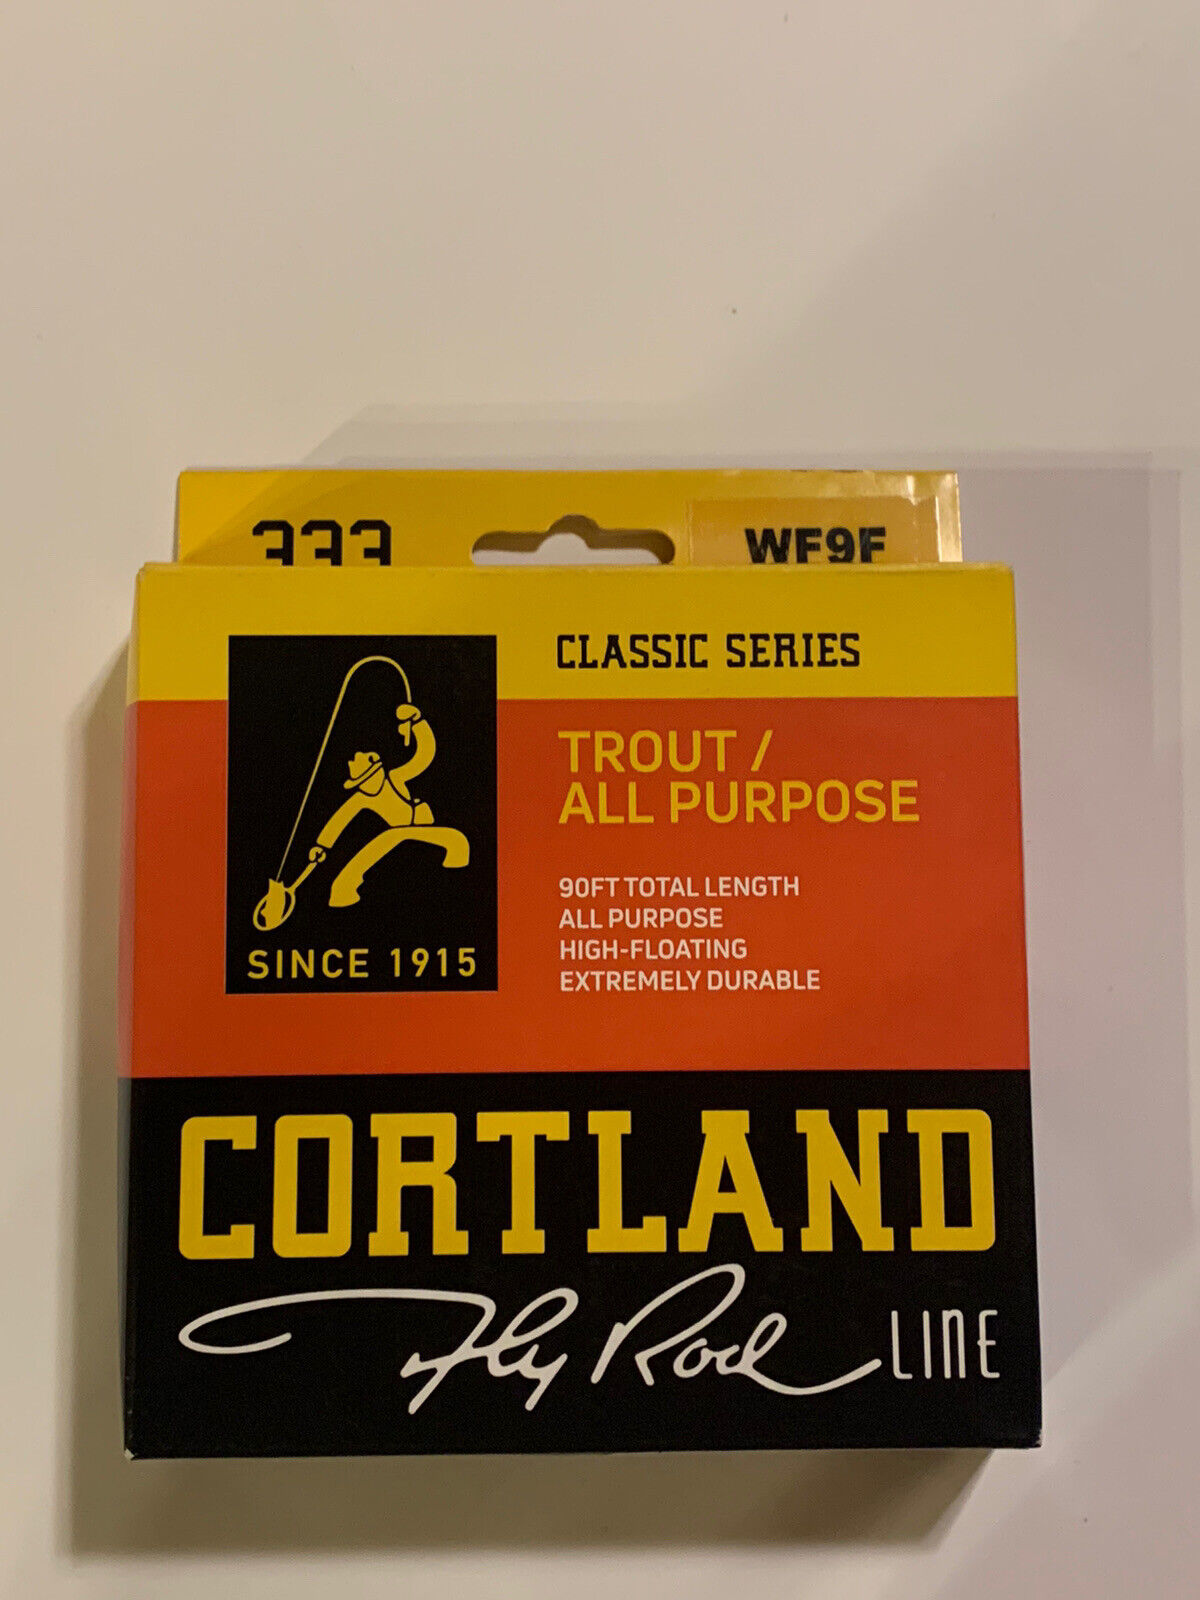 Cortland Classic Series 333 Trout/All Purpose Fly Rod Line WF9F